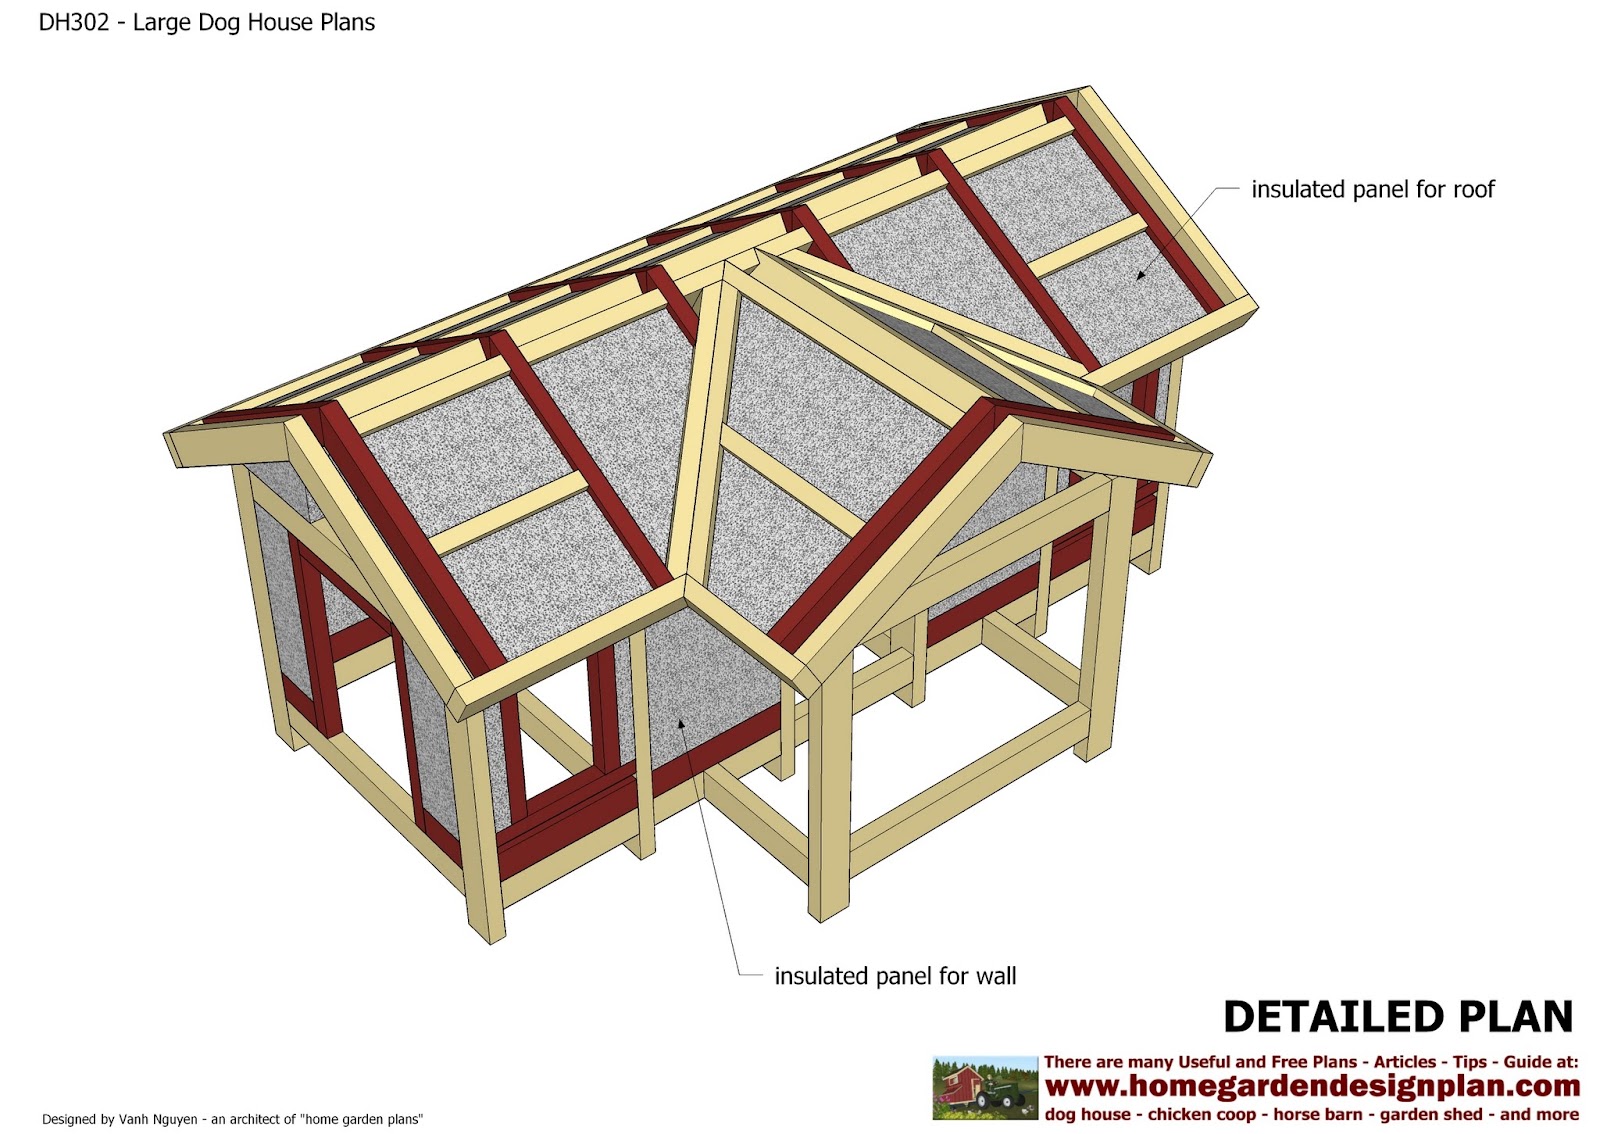  Dog House Plans Construction - Dog House Design - How To Build An